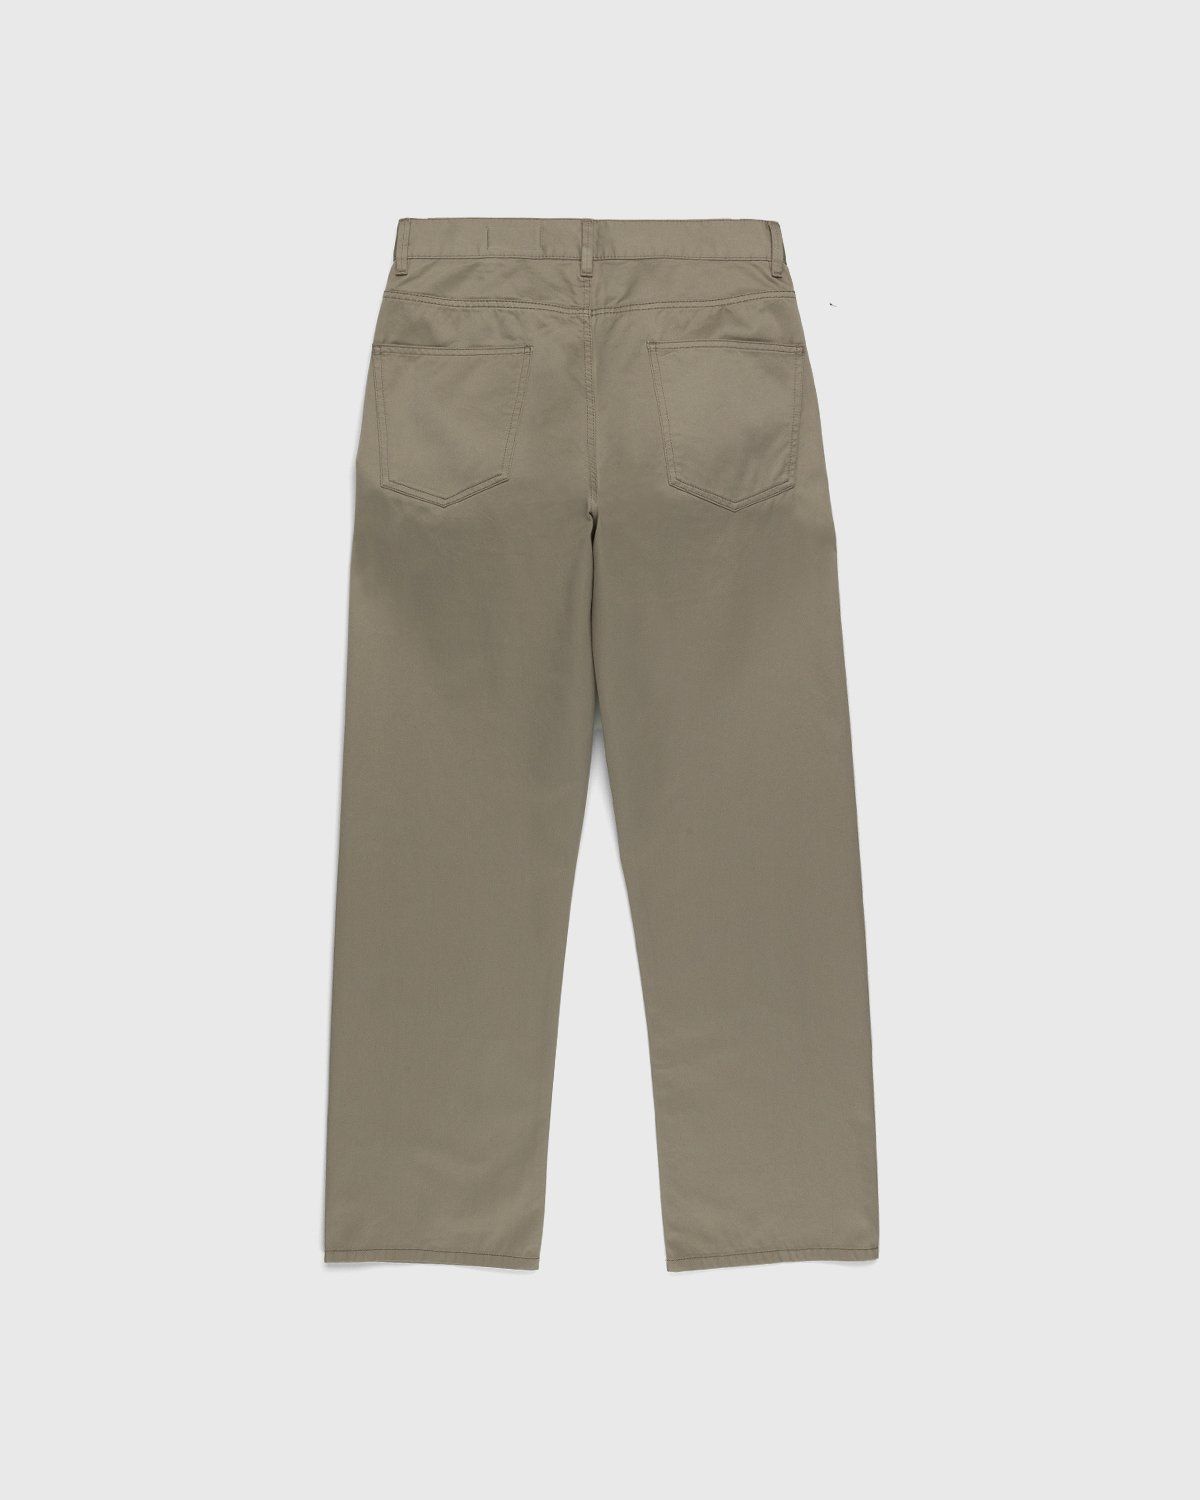 Lemaire – Seamless Pants Light Taupe - Pants - Beige - Image 2